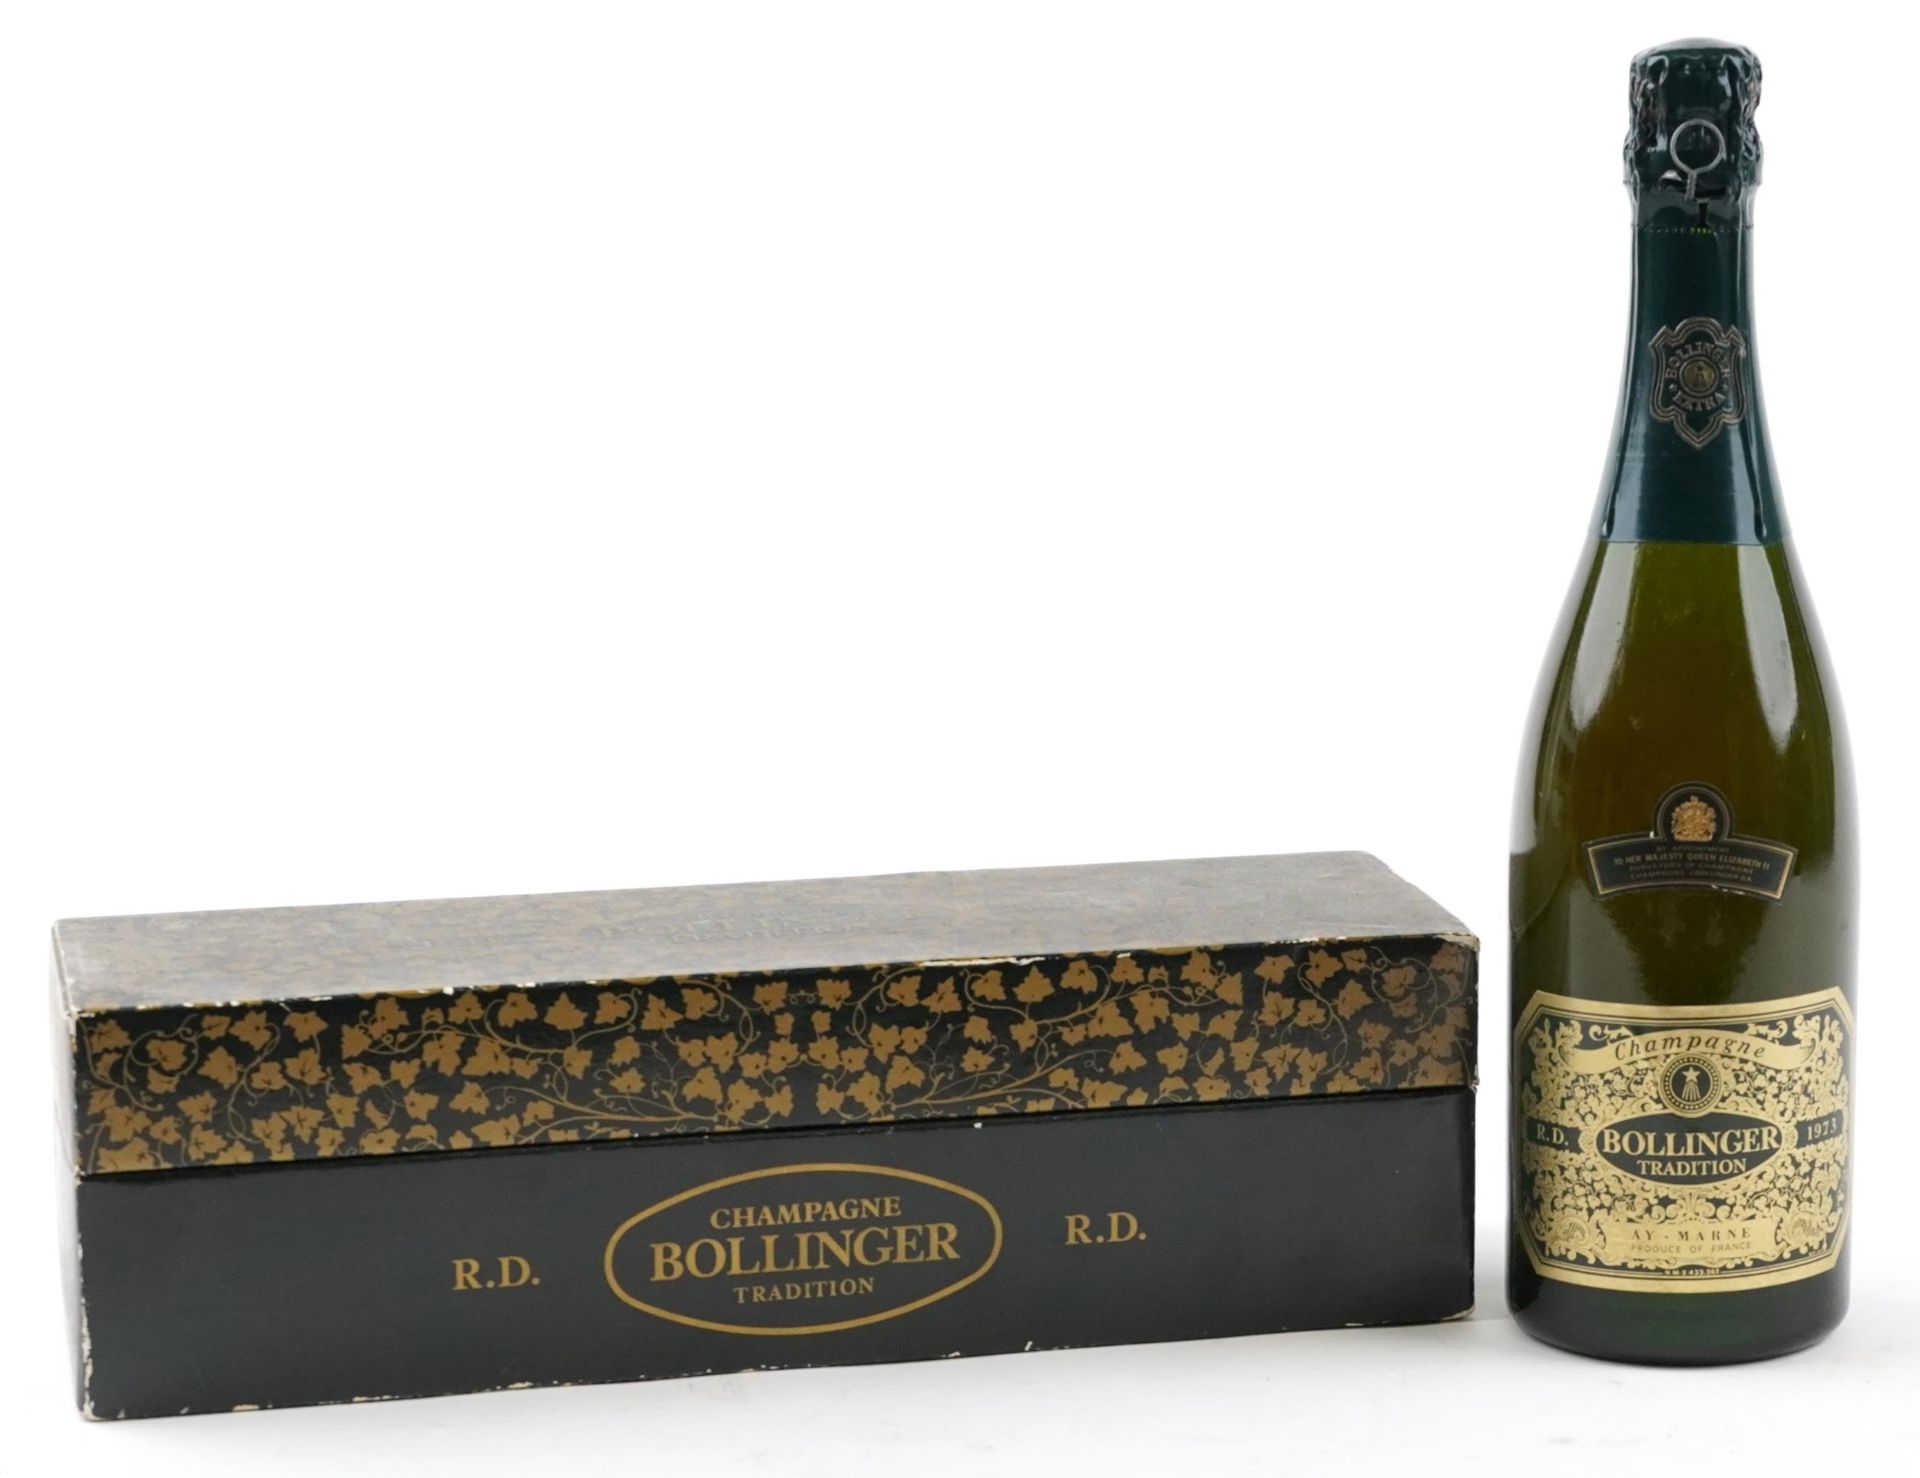 Bottle of 1973 Bollinger Tradition Champagne with box : For further information on this lot please